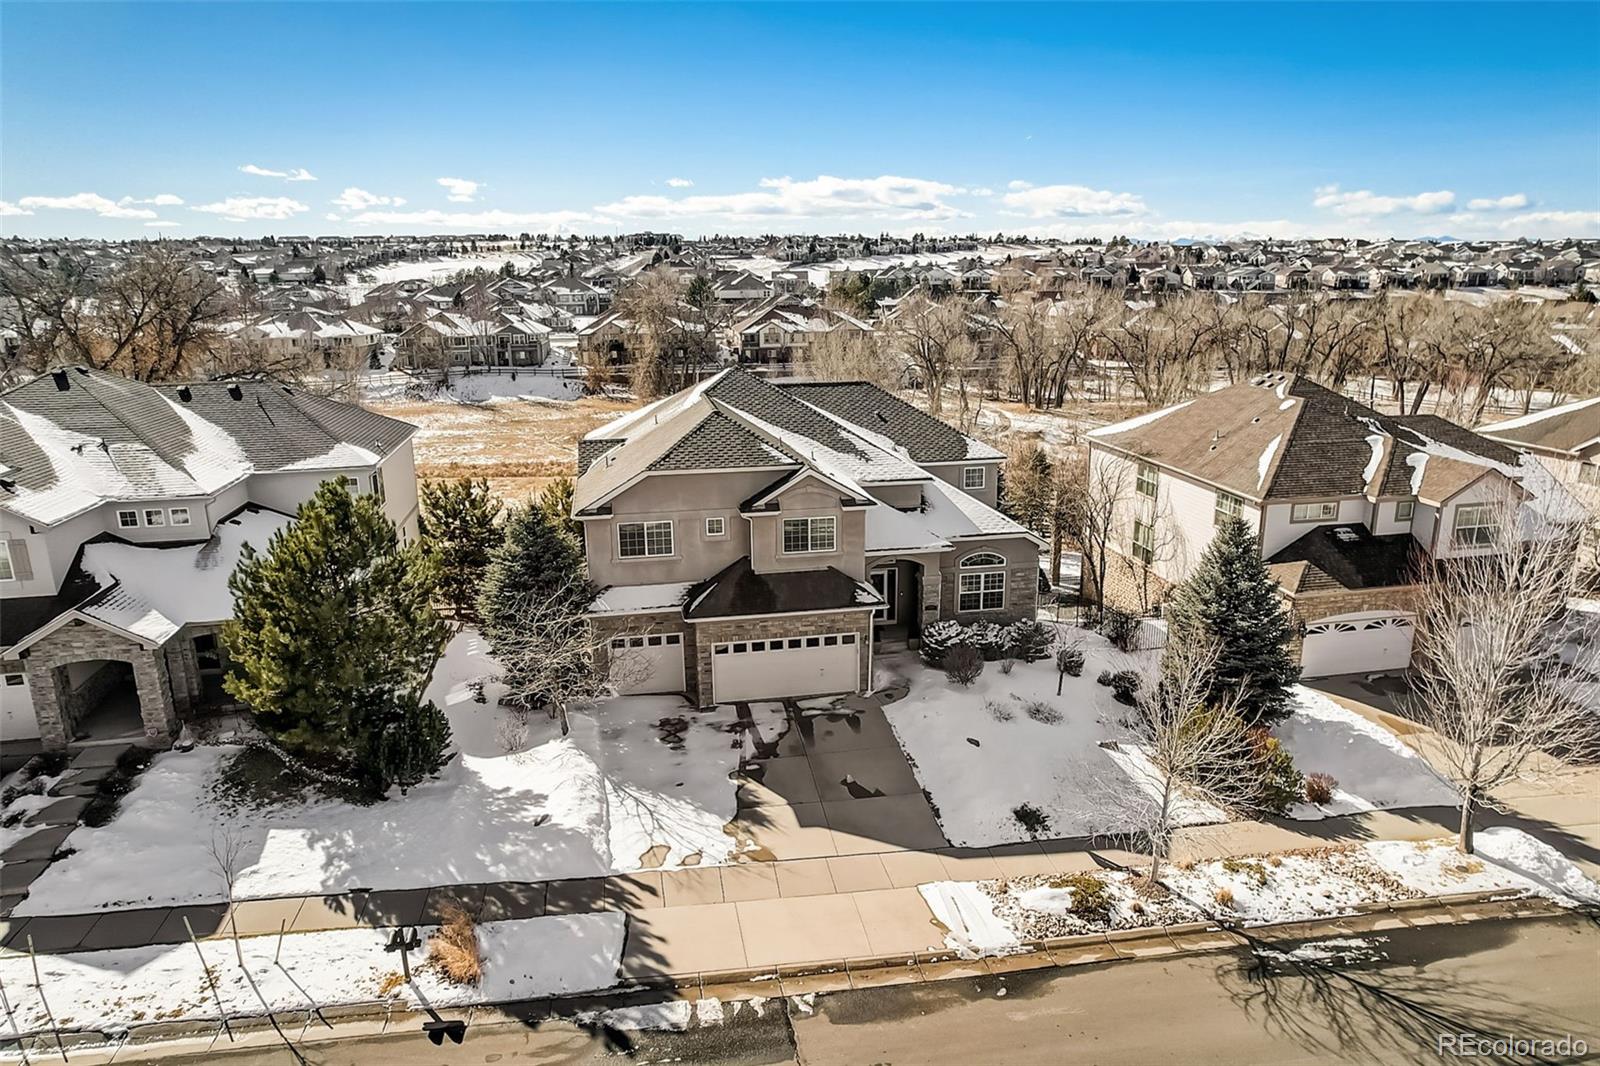 7819 s coolidge way, aurora sold home. Closed on 2024-04-08 for $965,000.